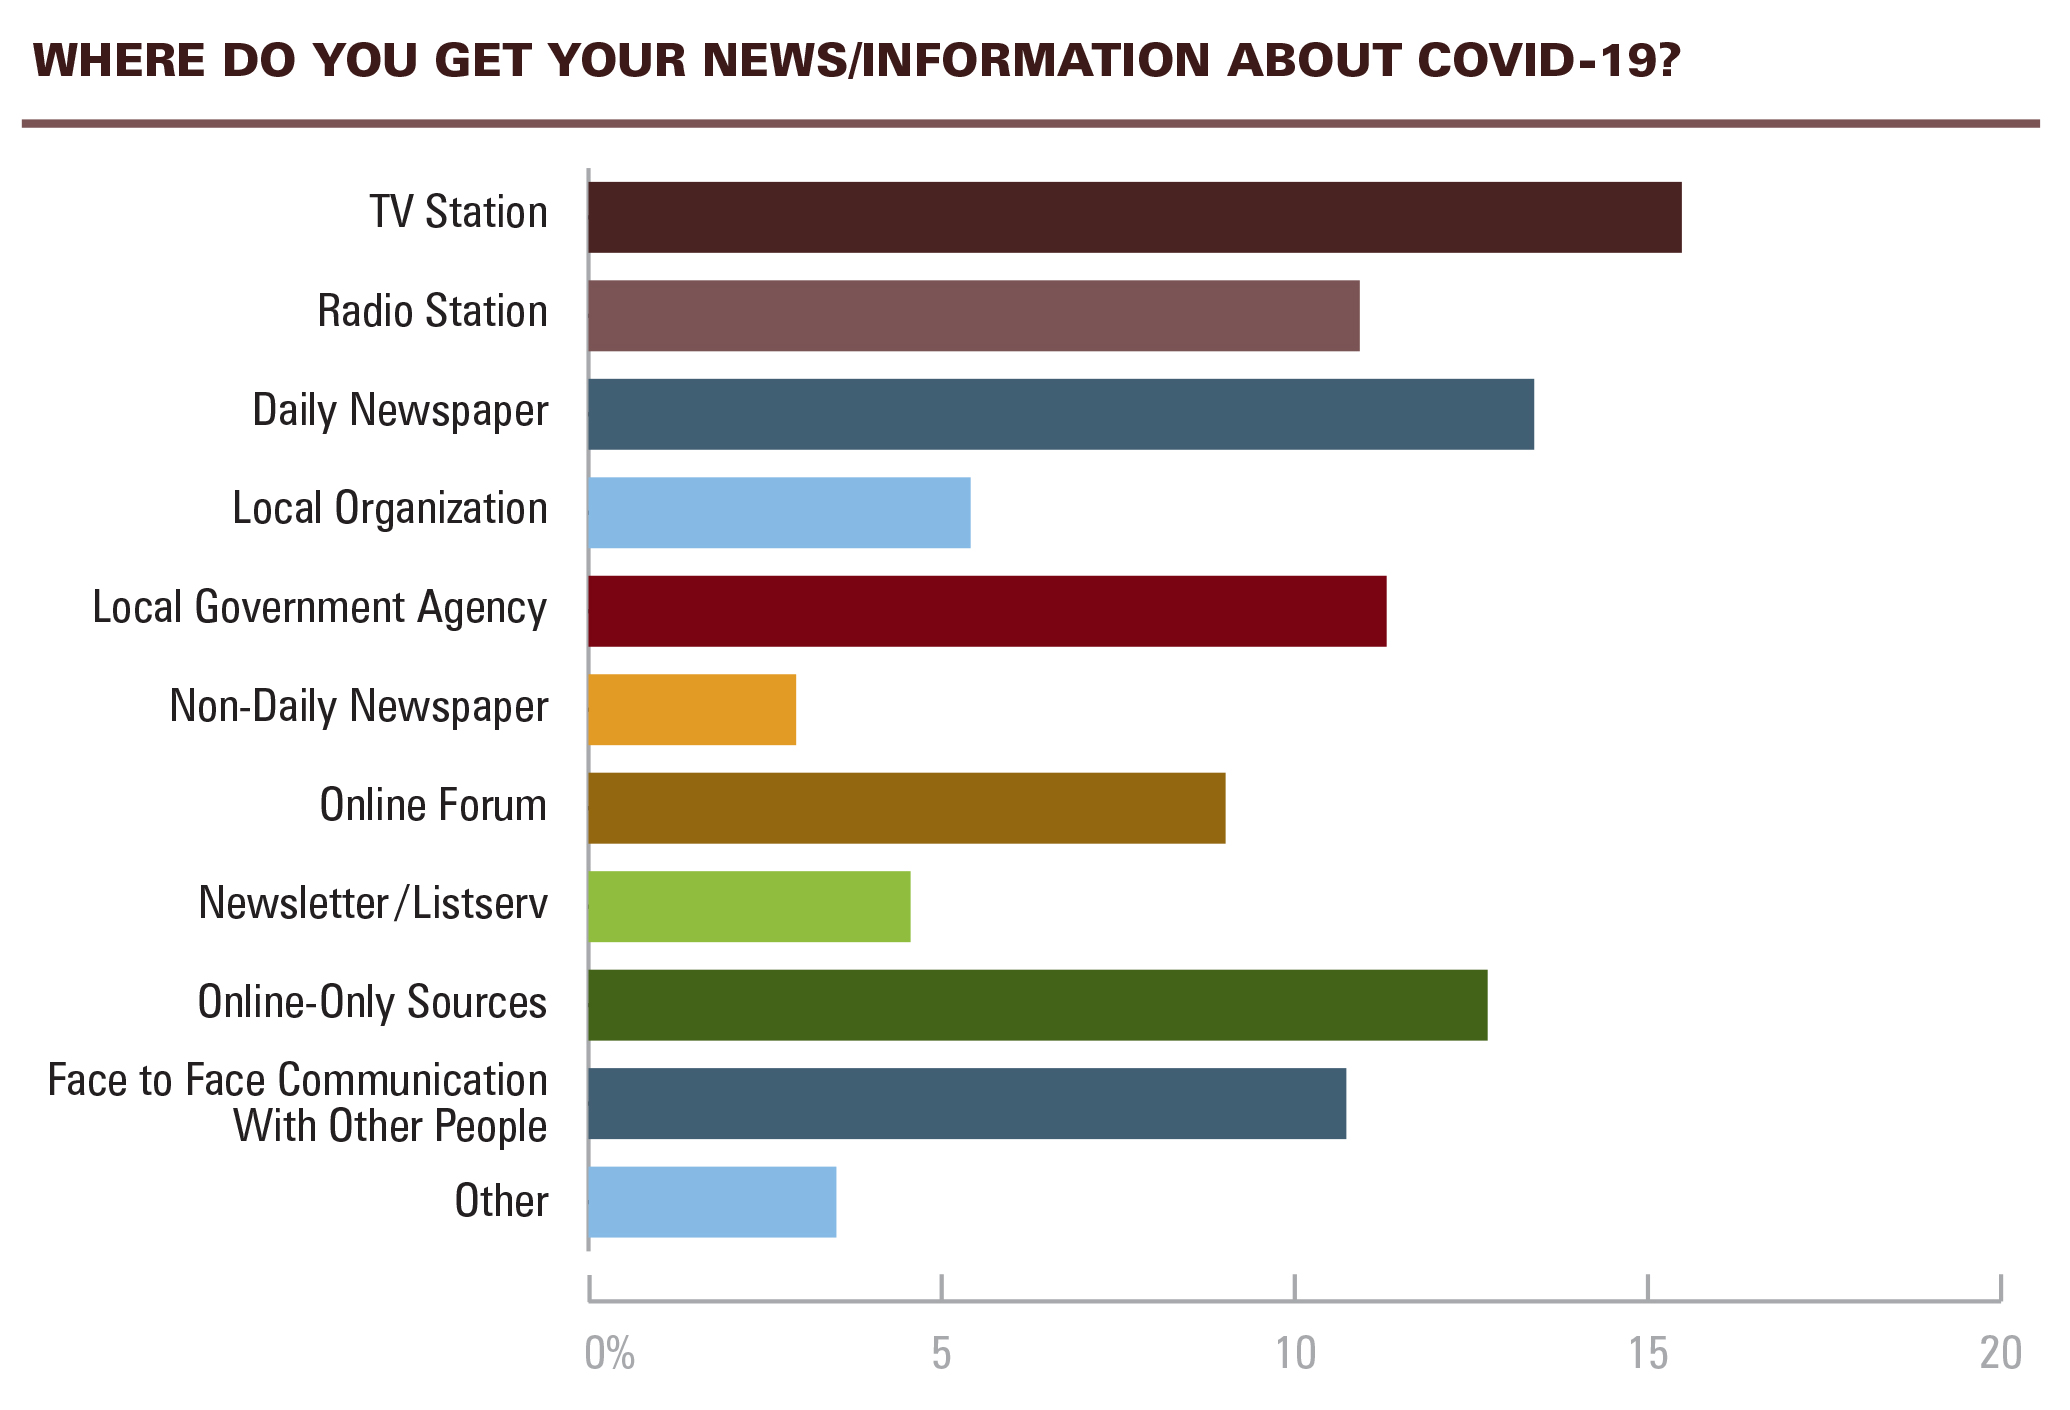 Horizontal bar graph visualizing News sources about COVID-19: A majority of respondents got their news and information about COVID-19 from: TV station, daily newspaper, local government agency, online-only sources, face to face communication with other people. A minority of respondents got their news and information about COVID-19 from: radio station, local organization, non-daily newspaper, online forum, newsletter/listserv, other.